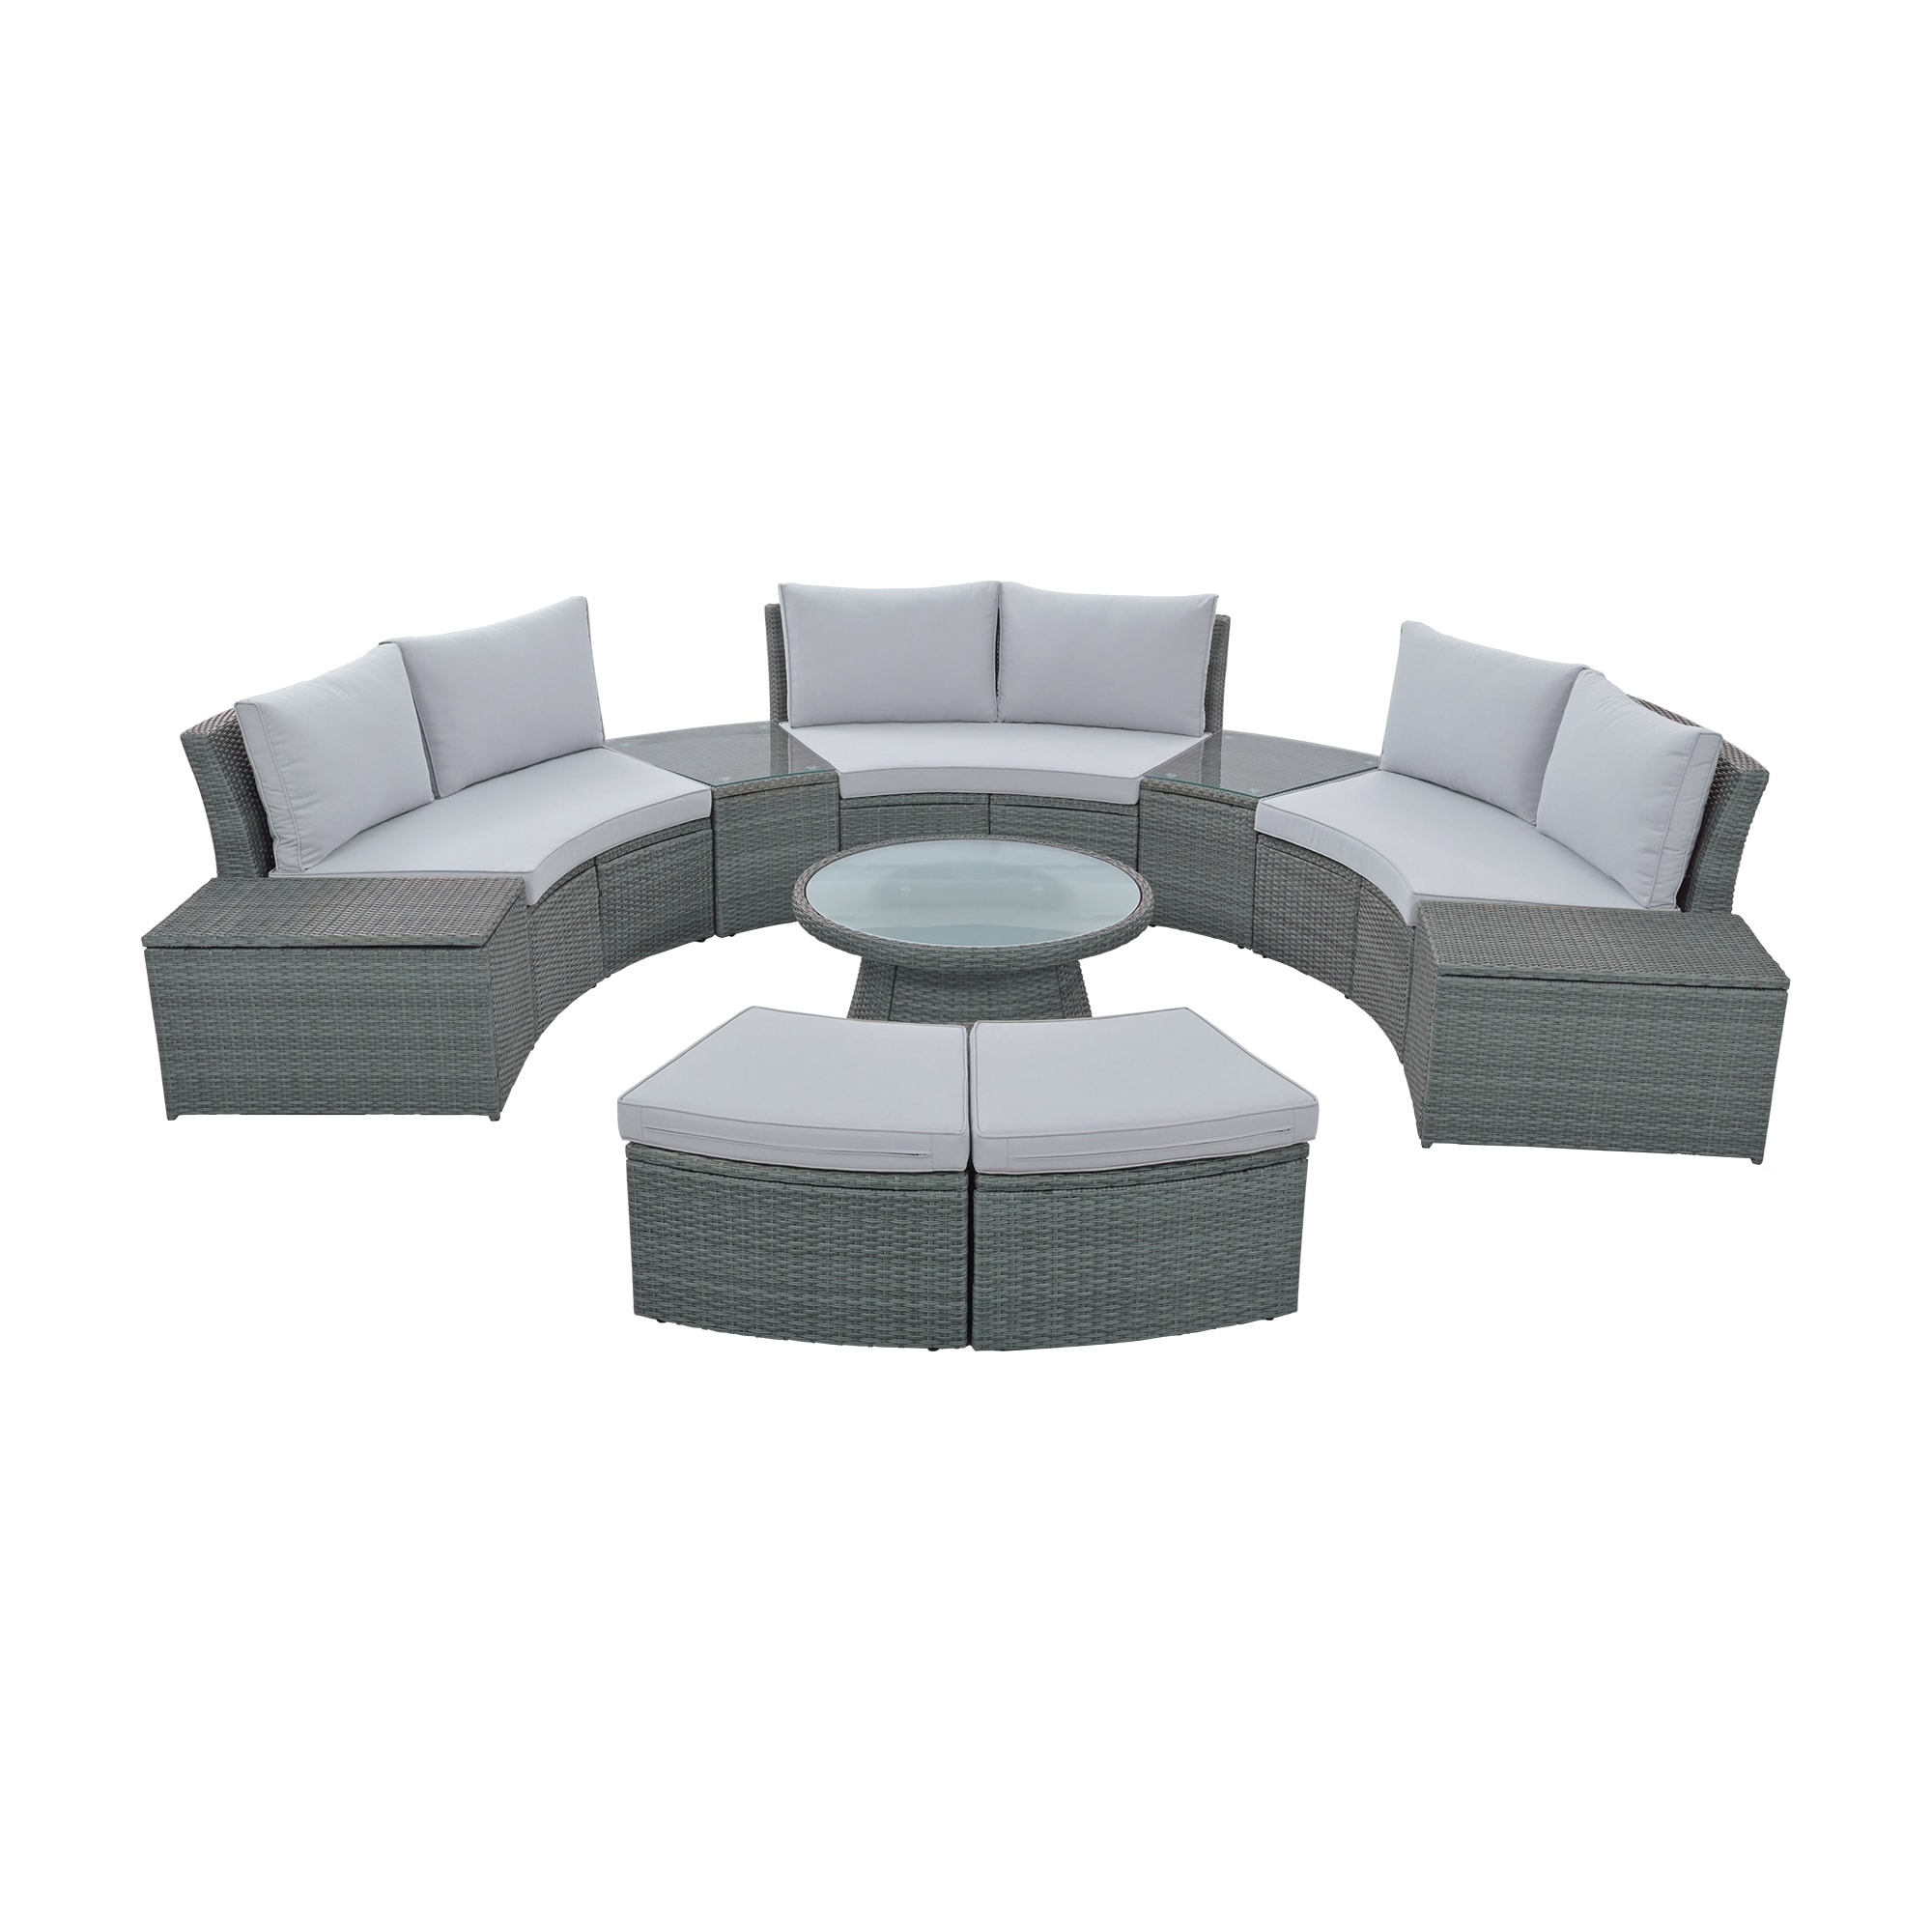 Half Round Rattan Sofa Set  10-piece Outdoor Sectional With Storage Table And Glass Top